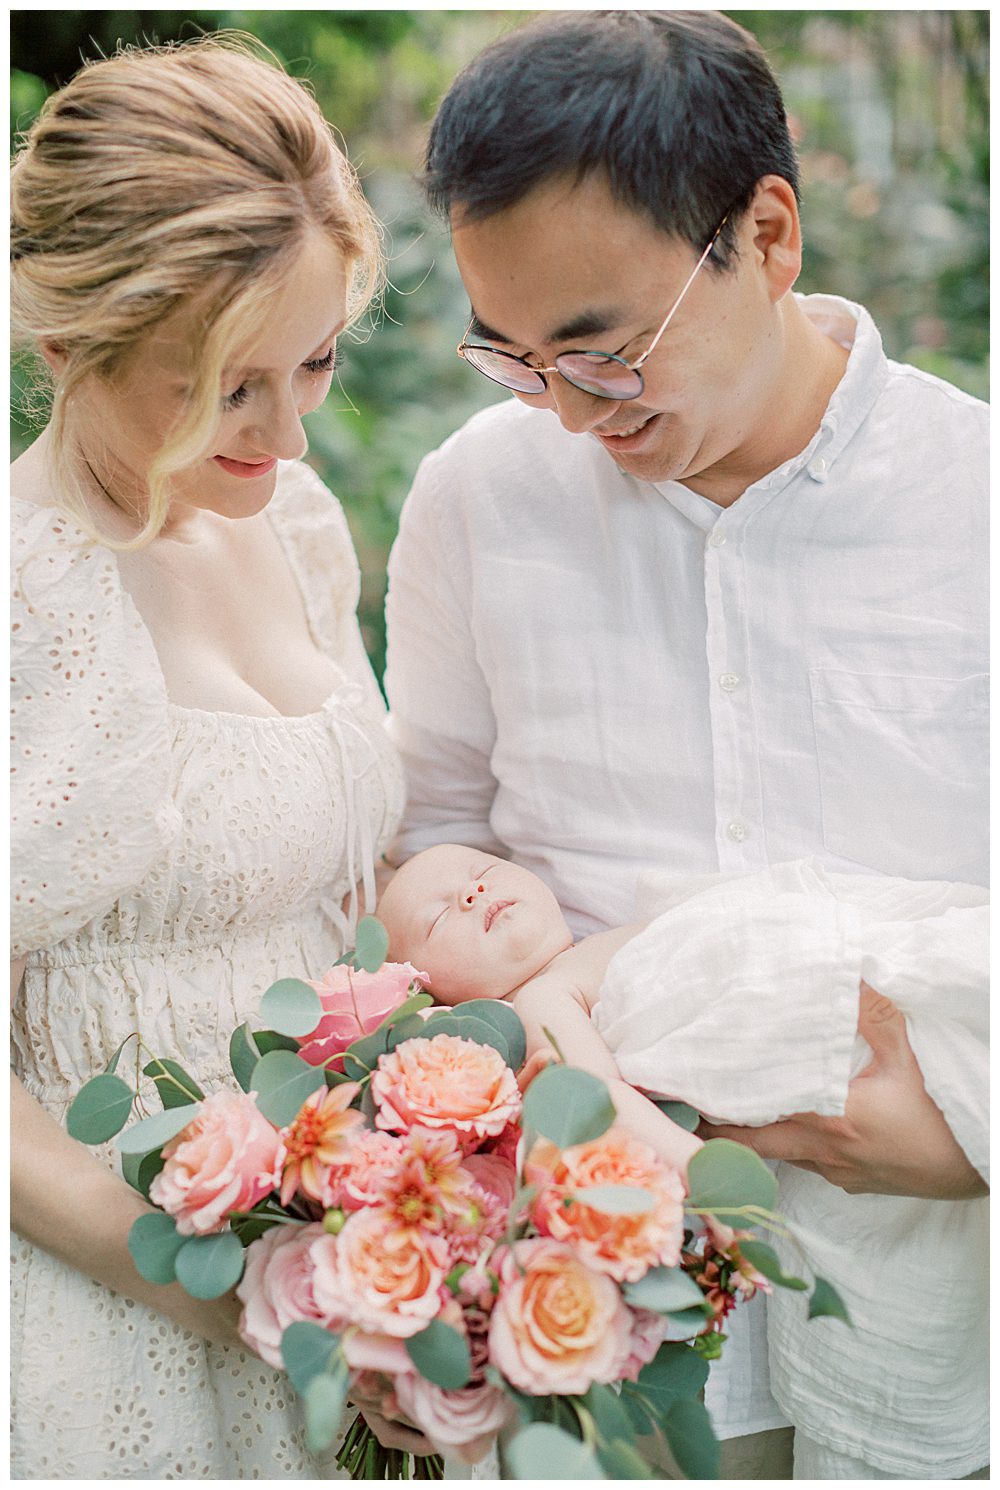 Newborn baby sleeps on bed of roses while being held by parents during outdoor newborn session.